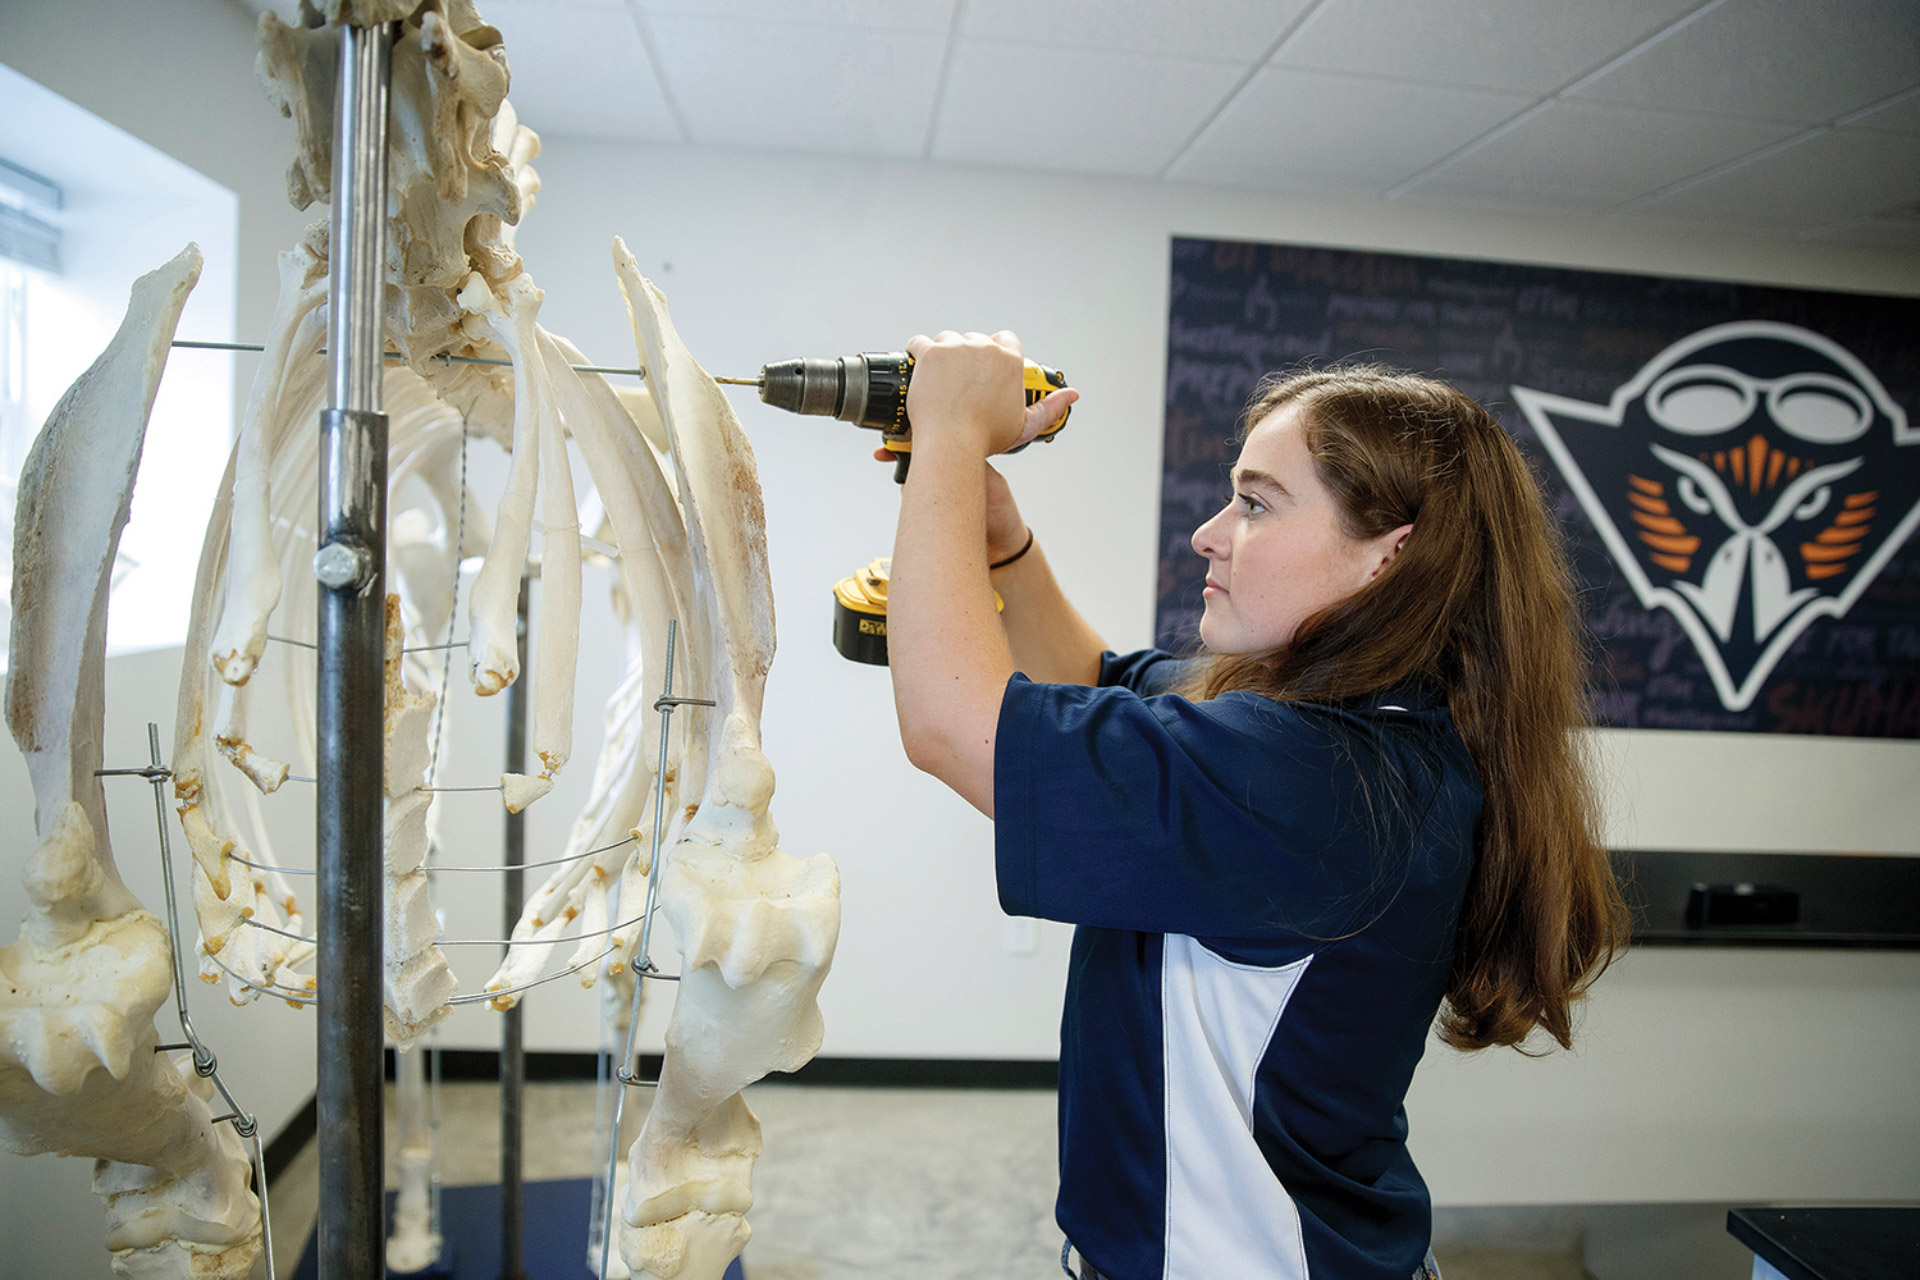 Savannah Matheny uses a power drill to assemble a horse skeleton named Ron